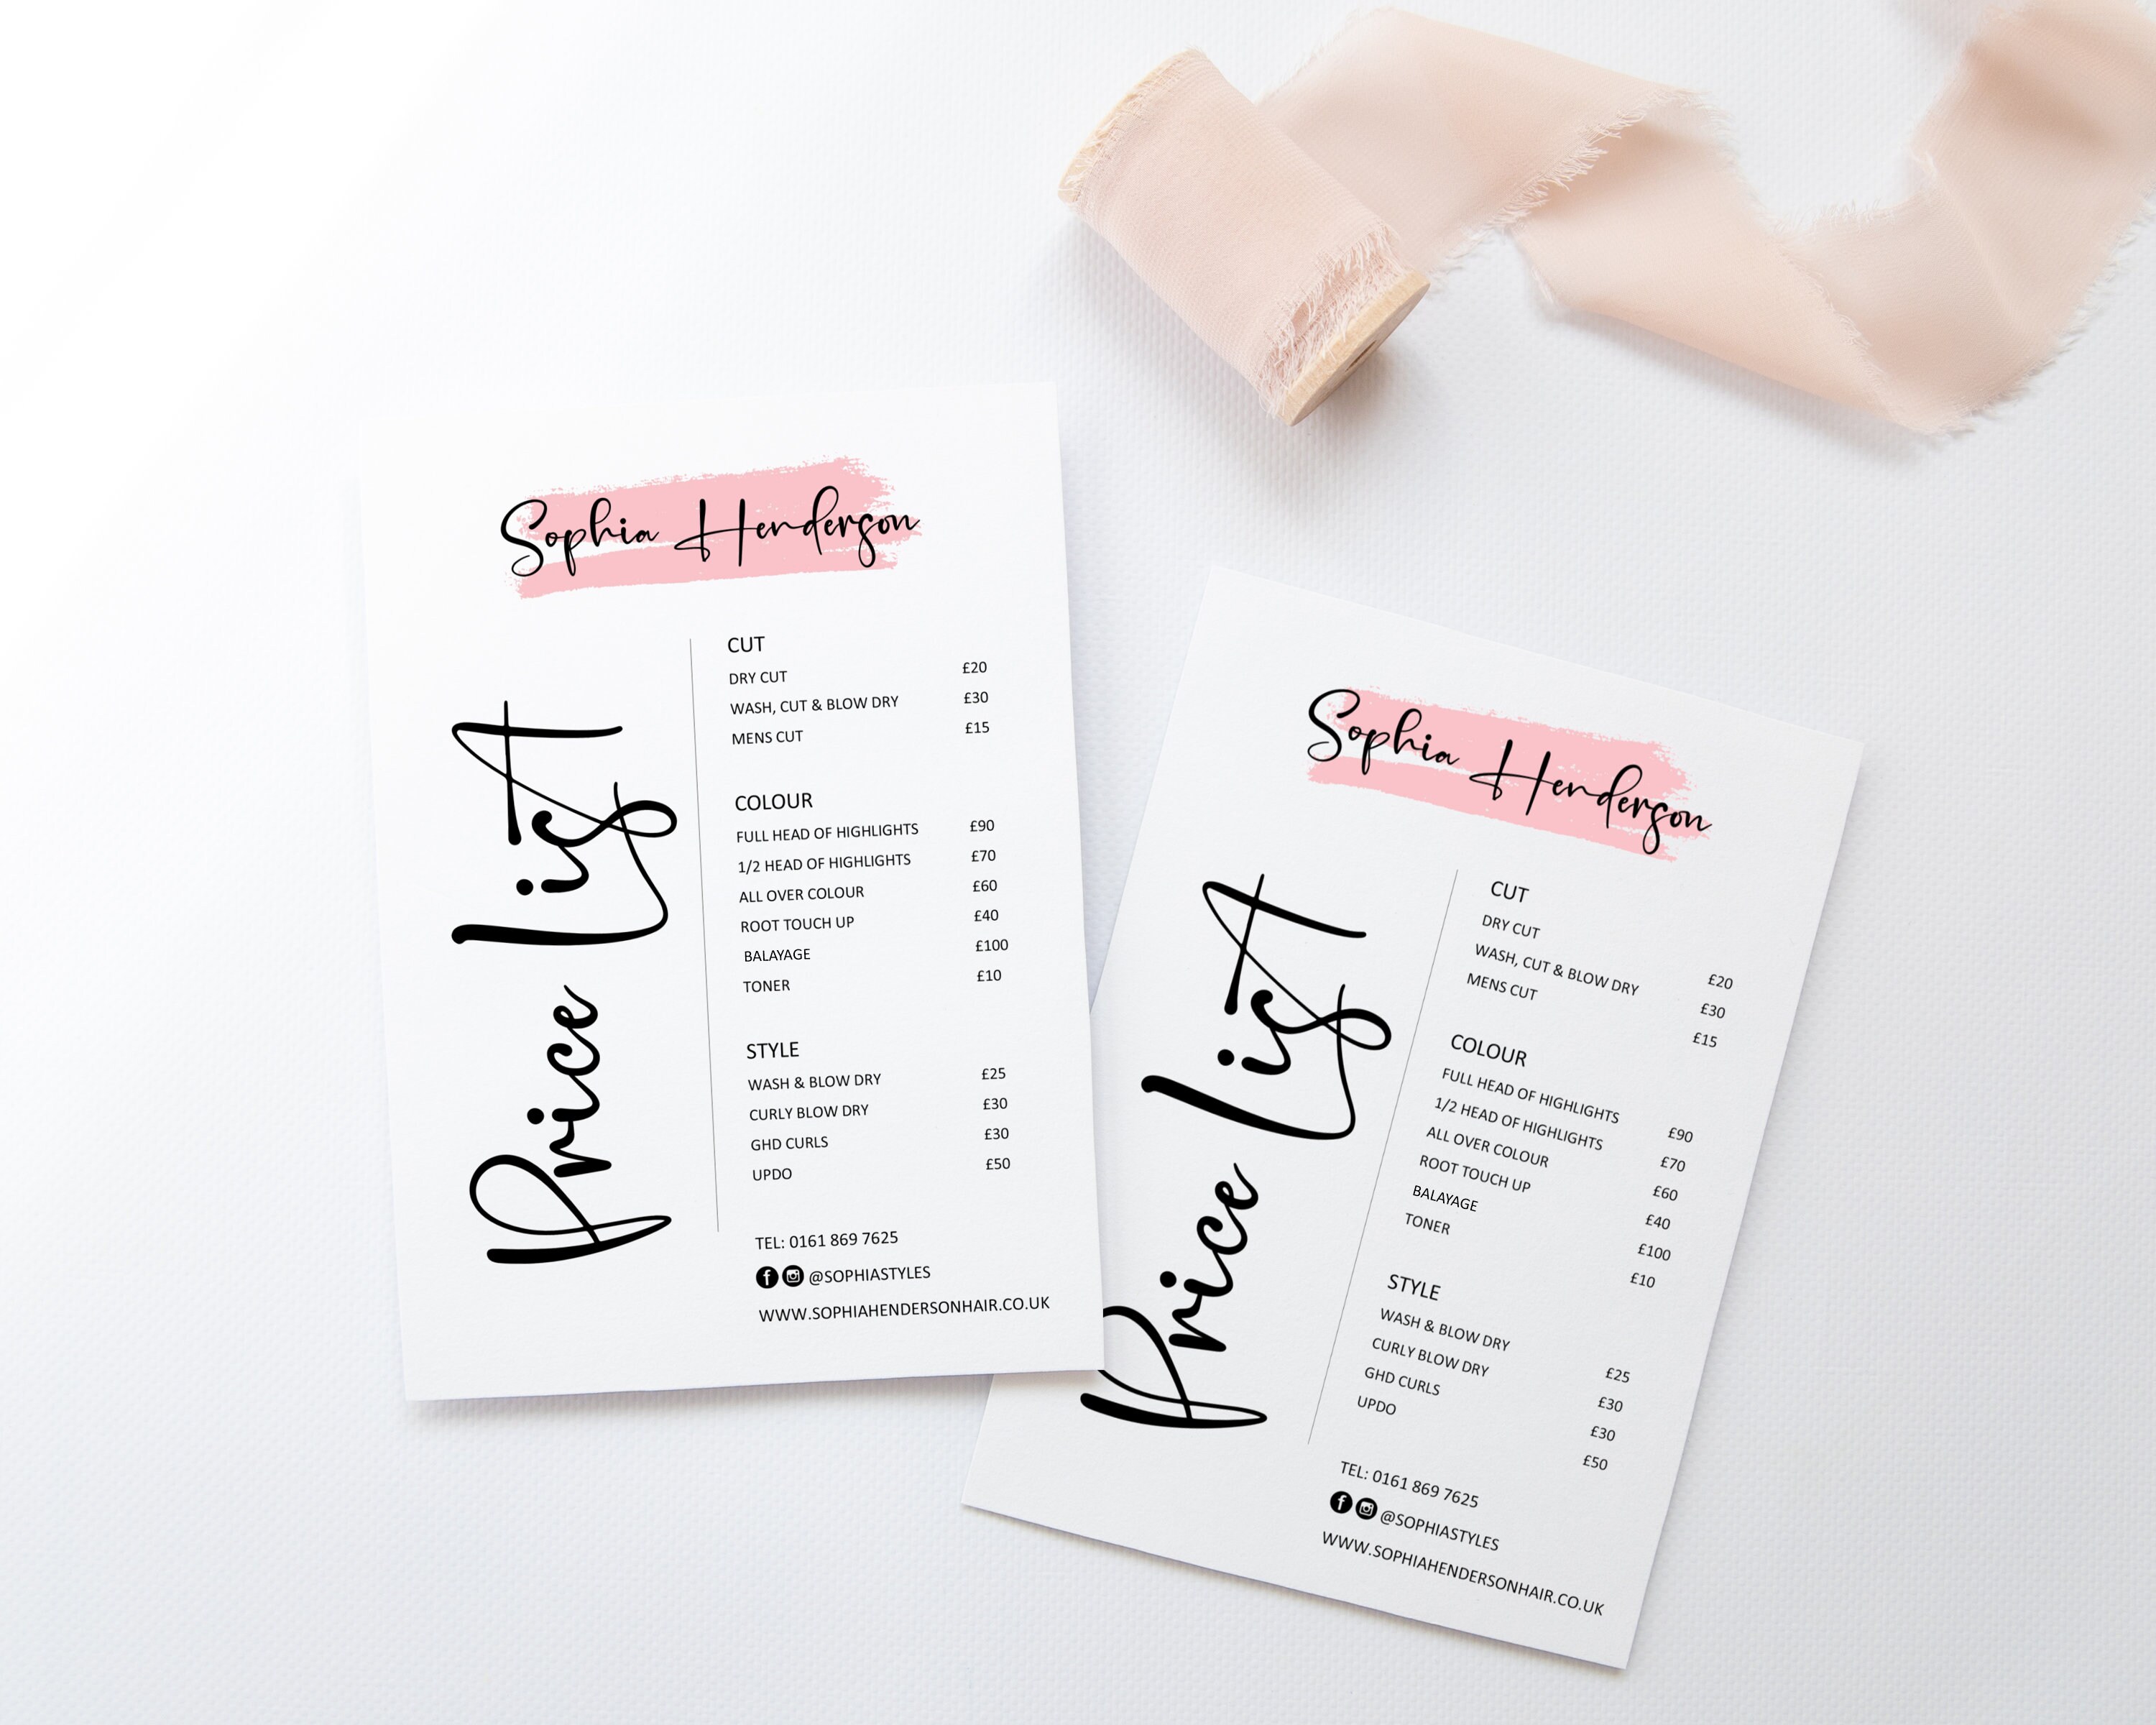 Printed Price List Flyers for Salon, Hairdresser, Nail Technician